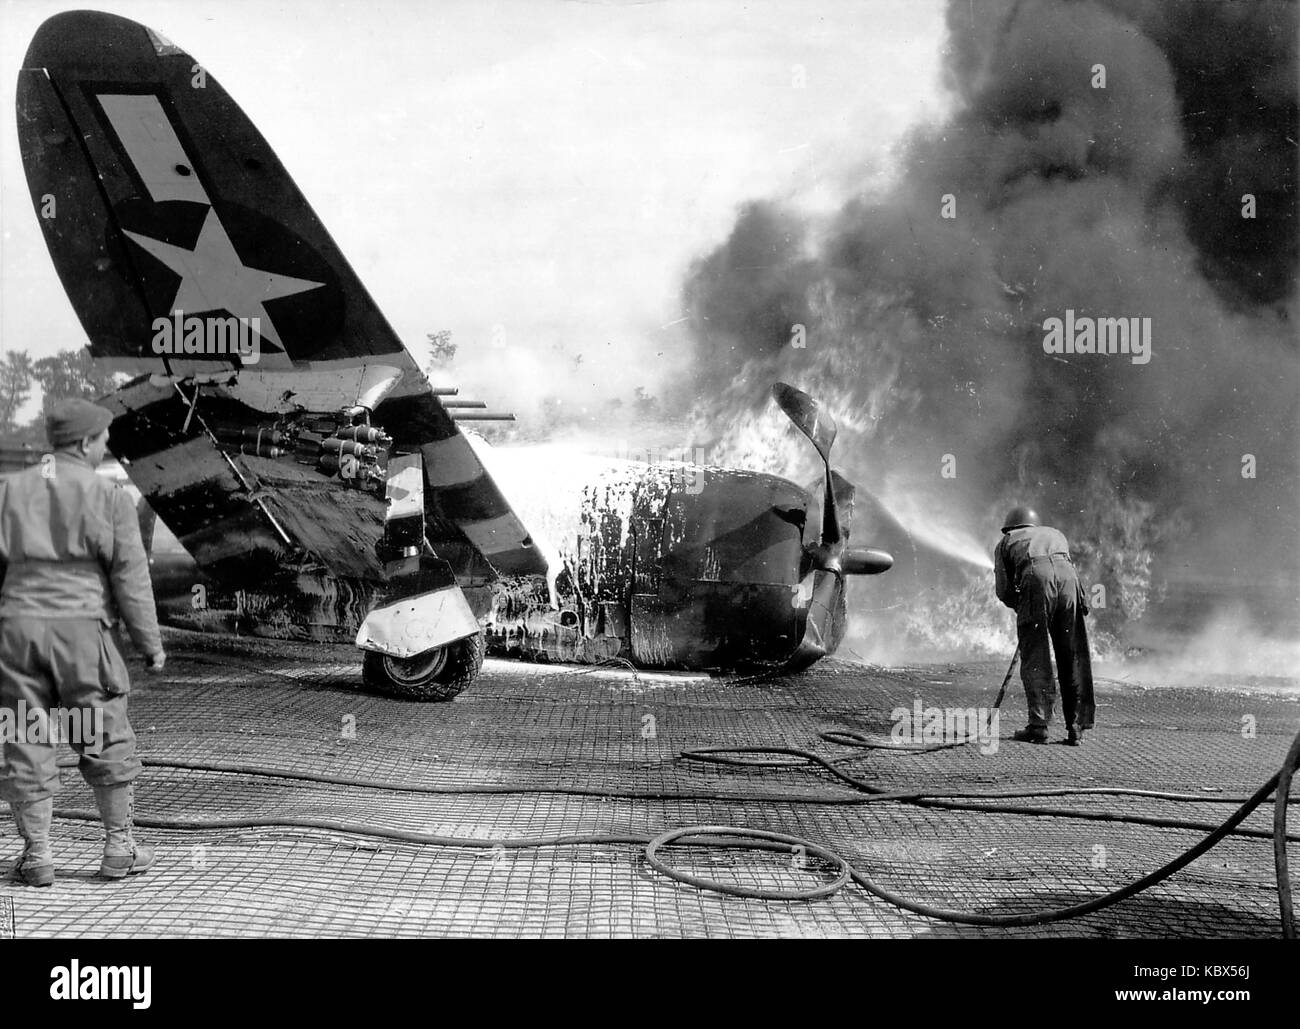 Republic P-47 Thunderbolt  . Airplane in flames after landing on a aircraft carrier during World War II Stock Photo